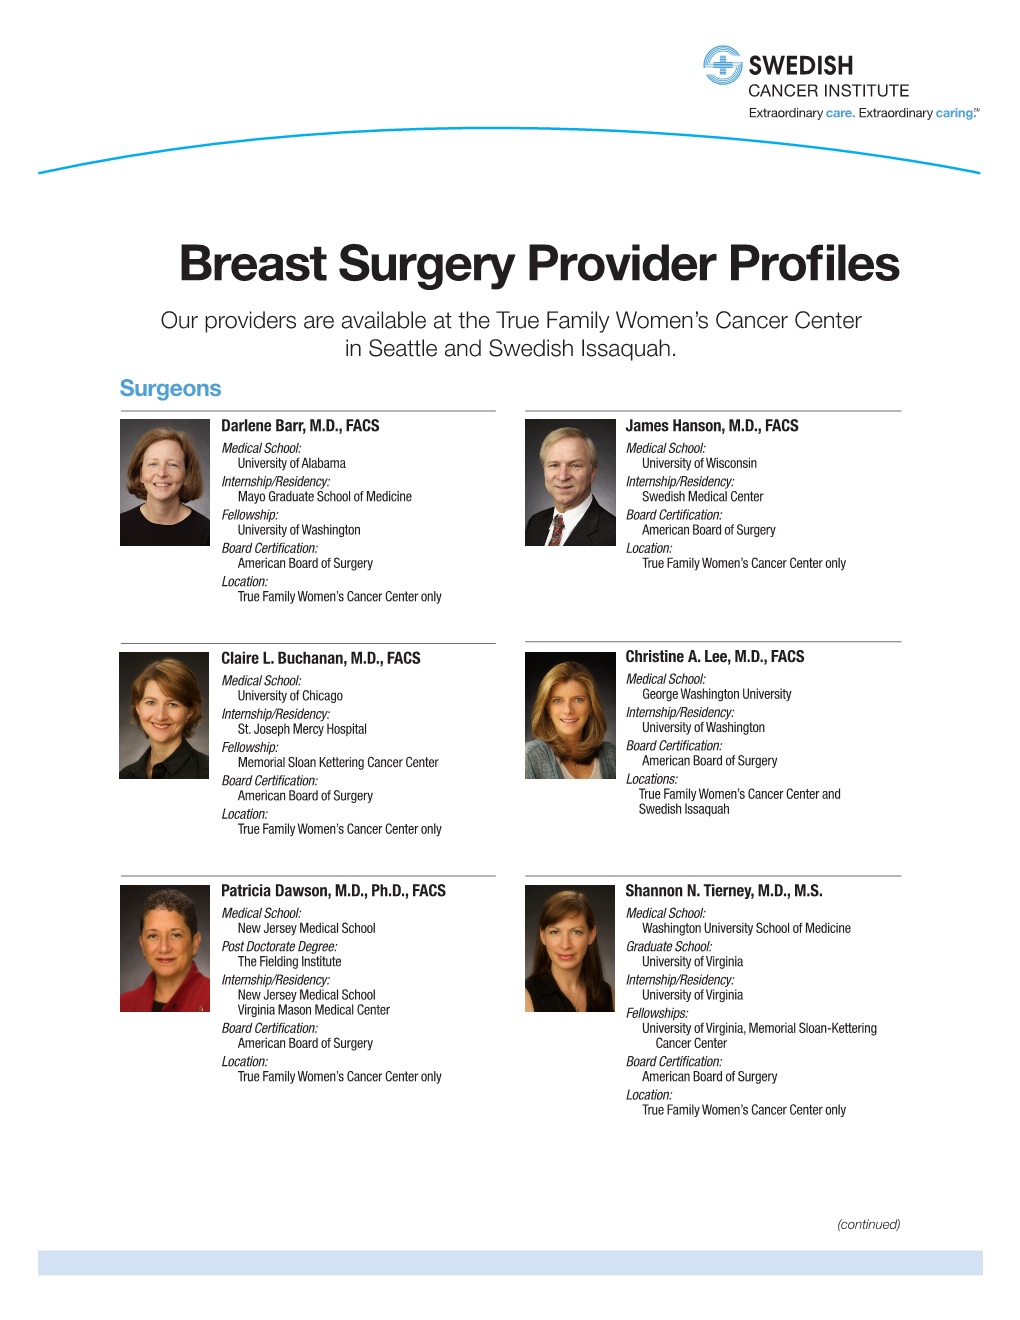 Breast Surgery Provider Profiles Our Providers Are Available at the True Family Women’S Cancer Center in Seattle and Swedish Issaquah